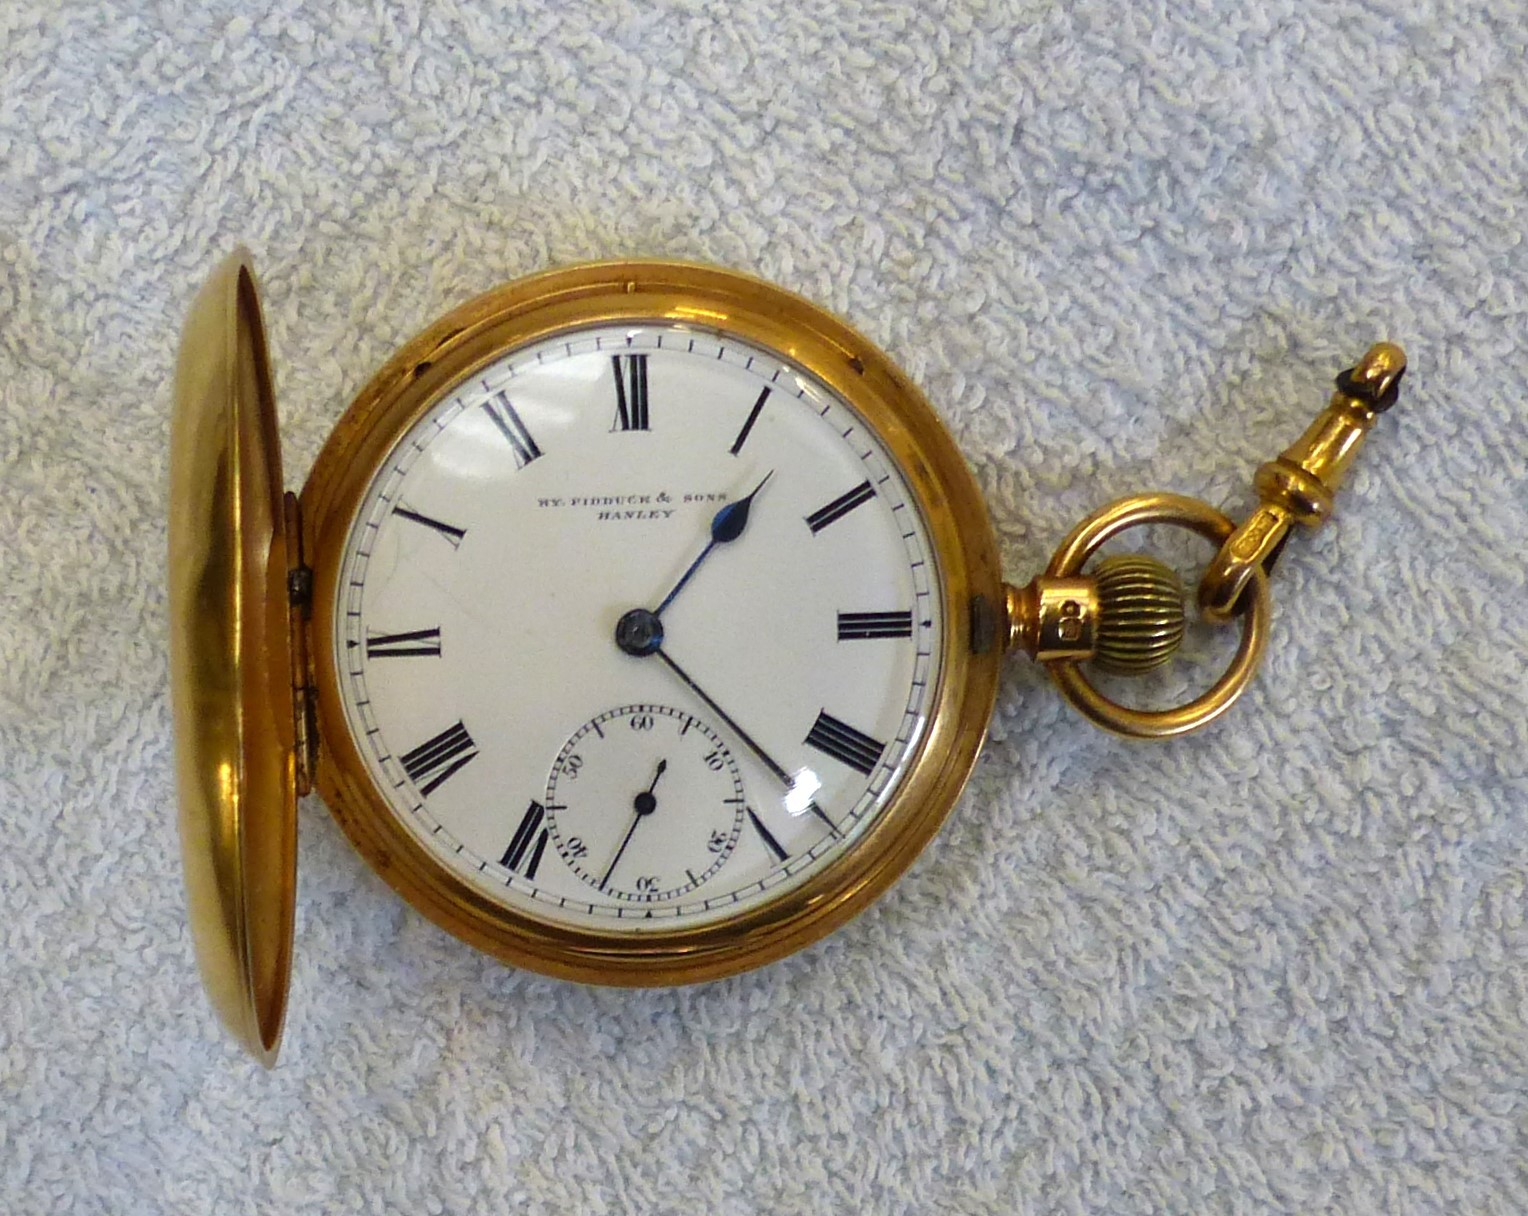 18ct gold cased 'Pidduck & Sons Hanley' full hunter pocket watch, hallmarked for Chester 1953,